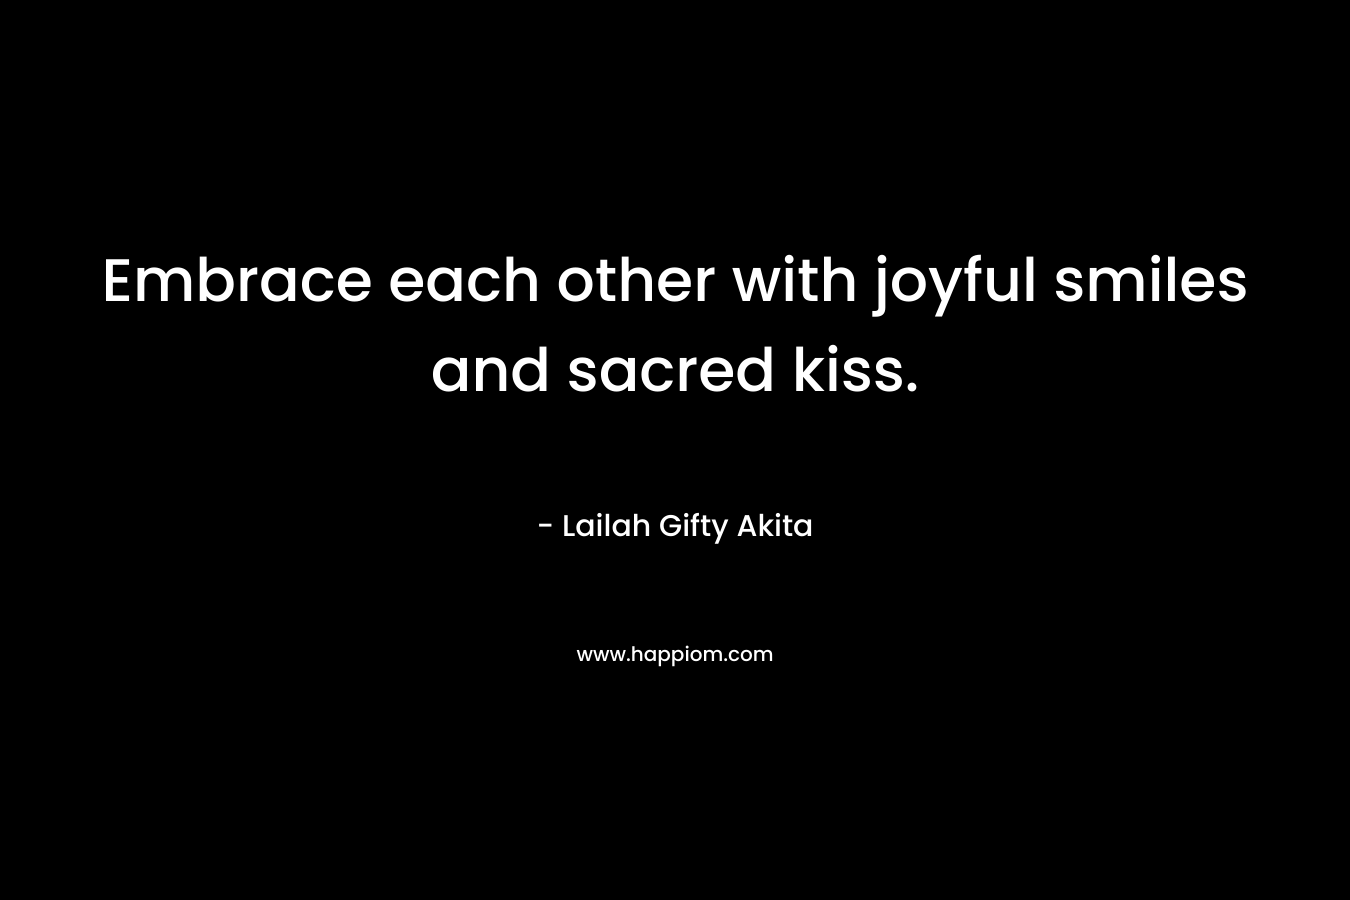 Embrace each other with joyful smiles and sacred kiss.